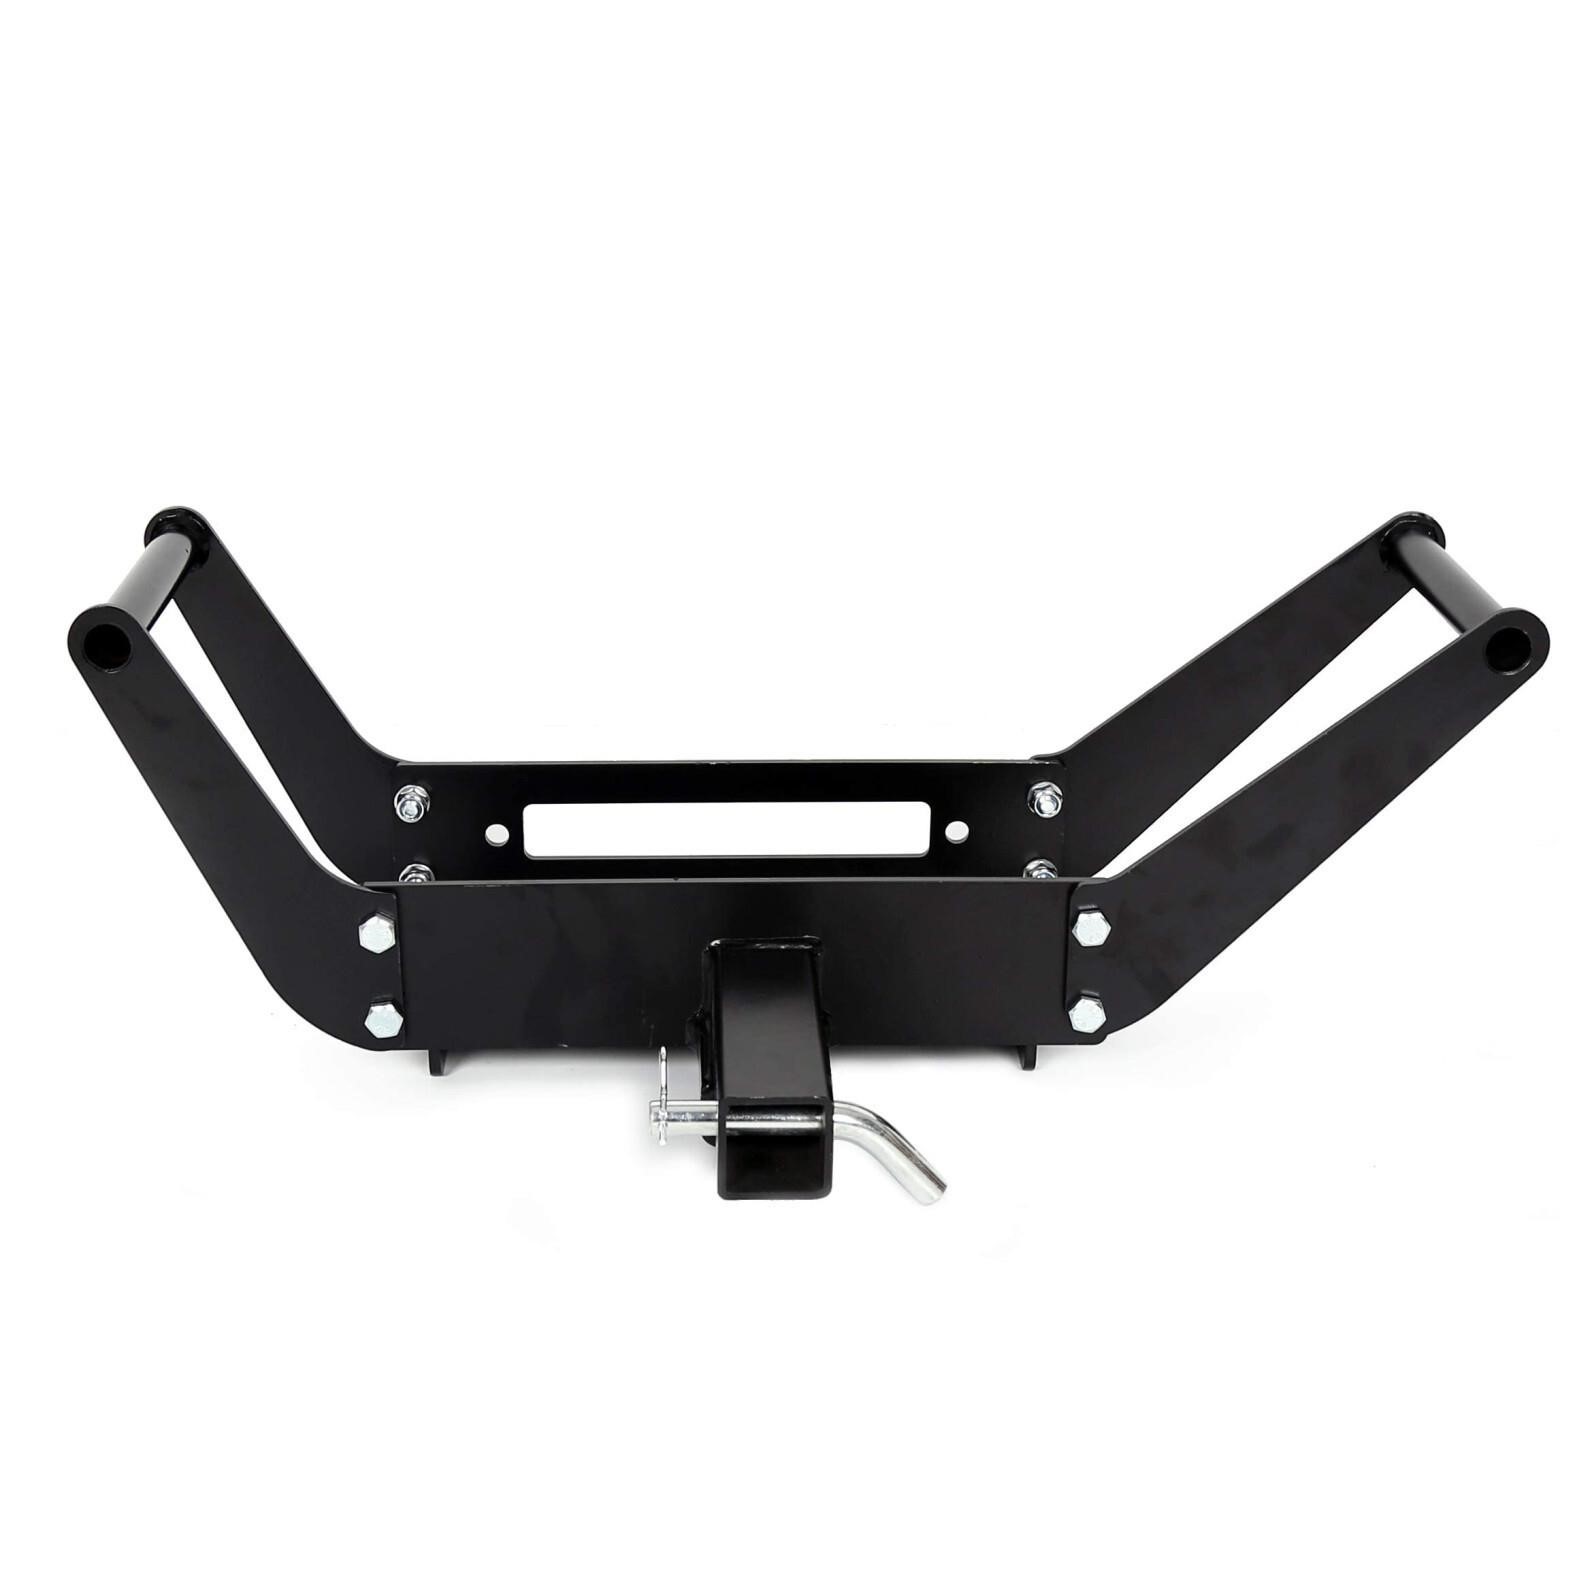 ECOTRIC 10x 4 1/2 Cradle Winch Mount Mounting Plat